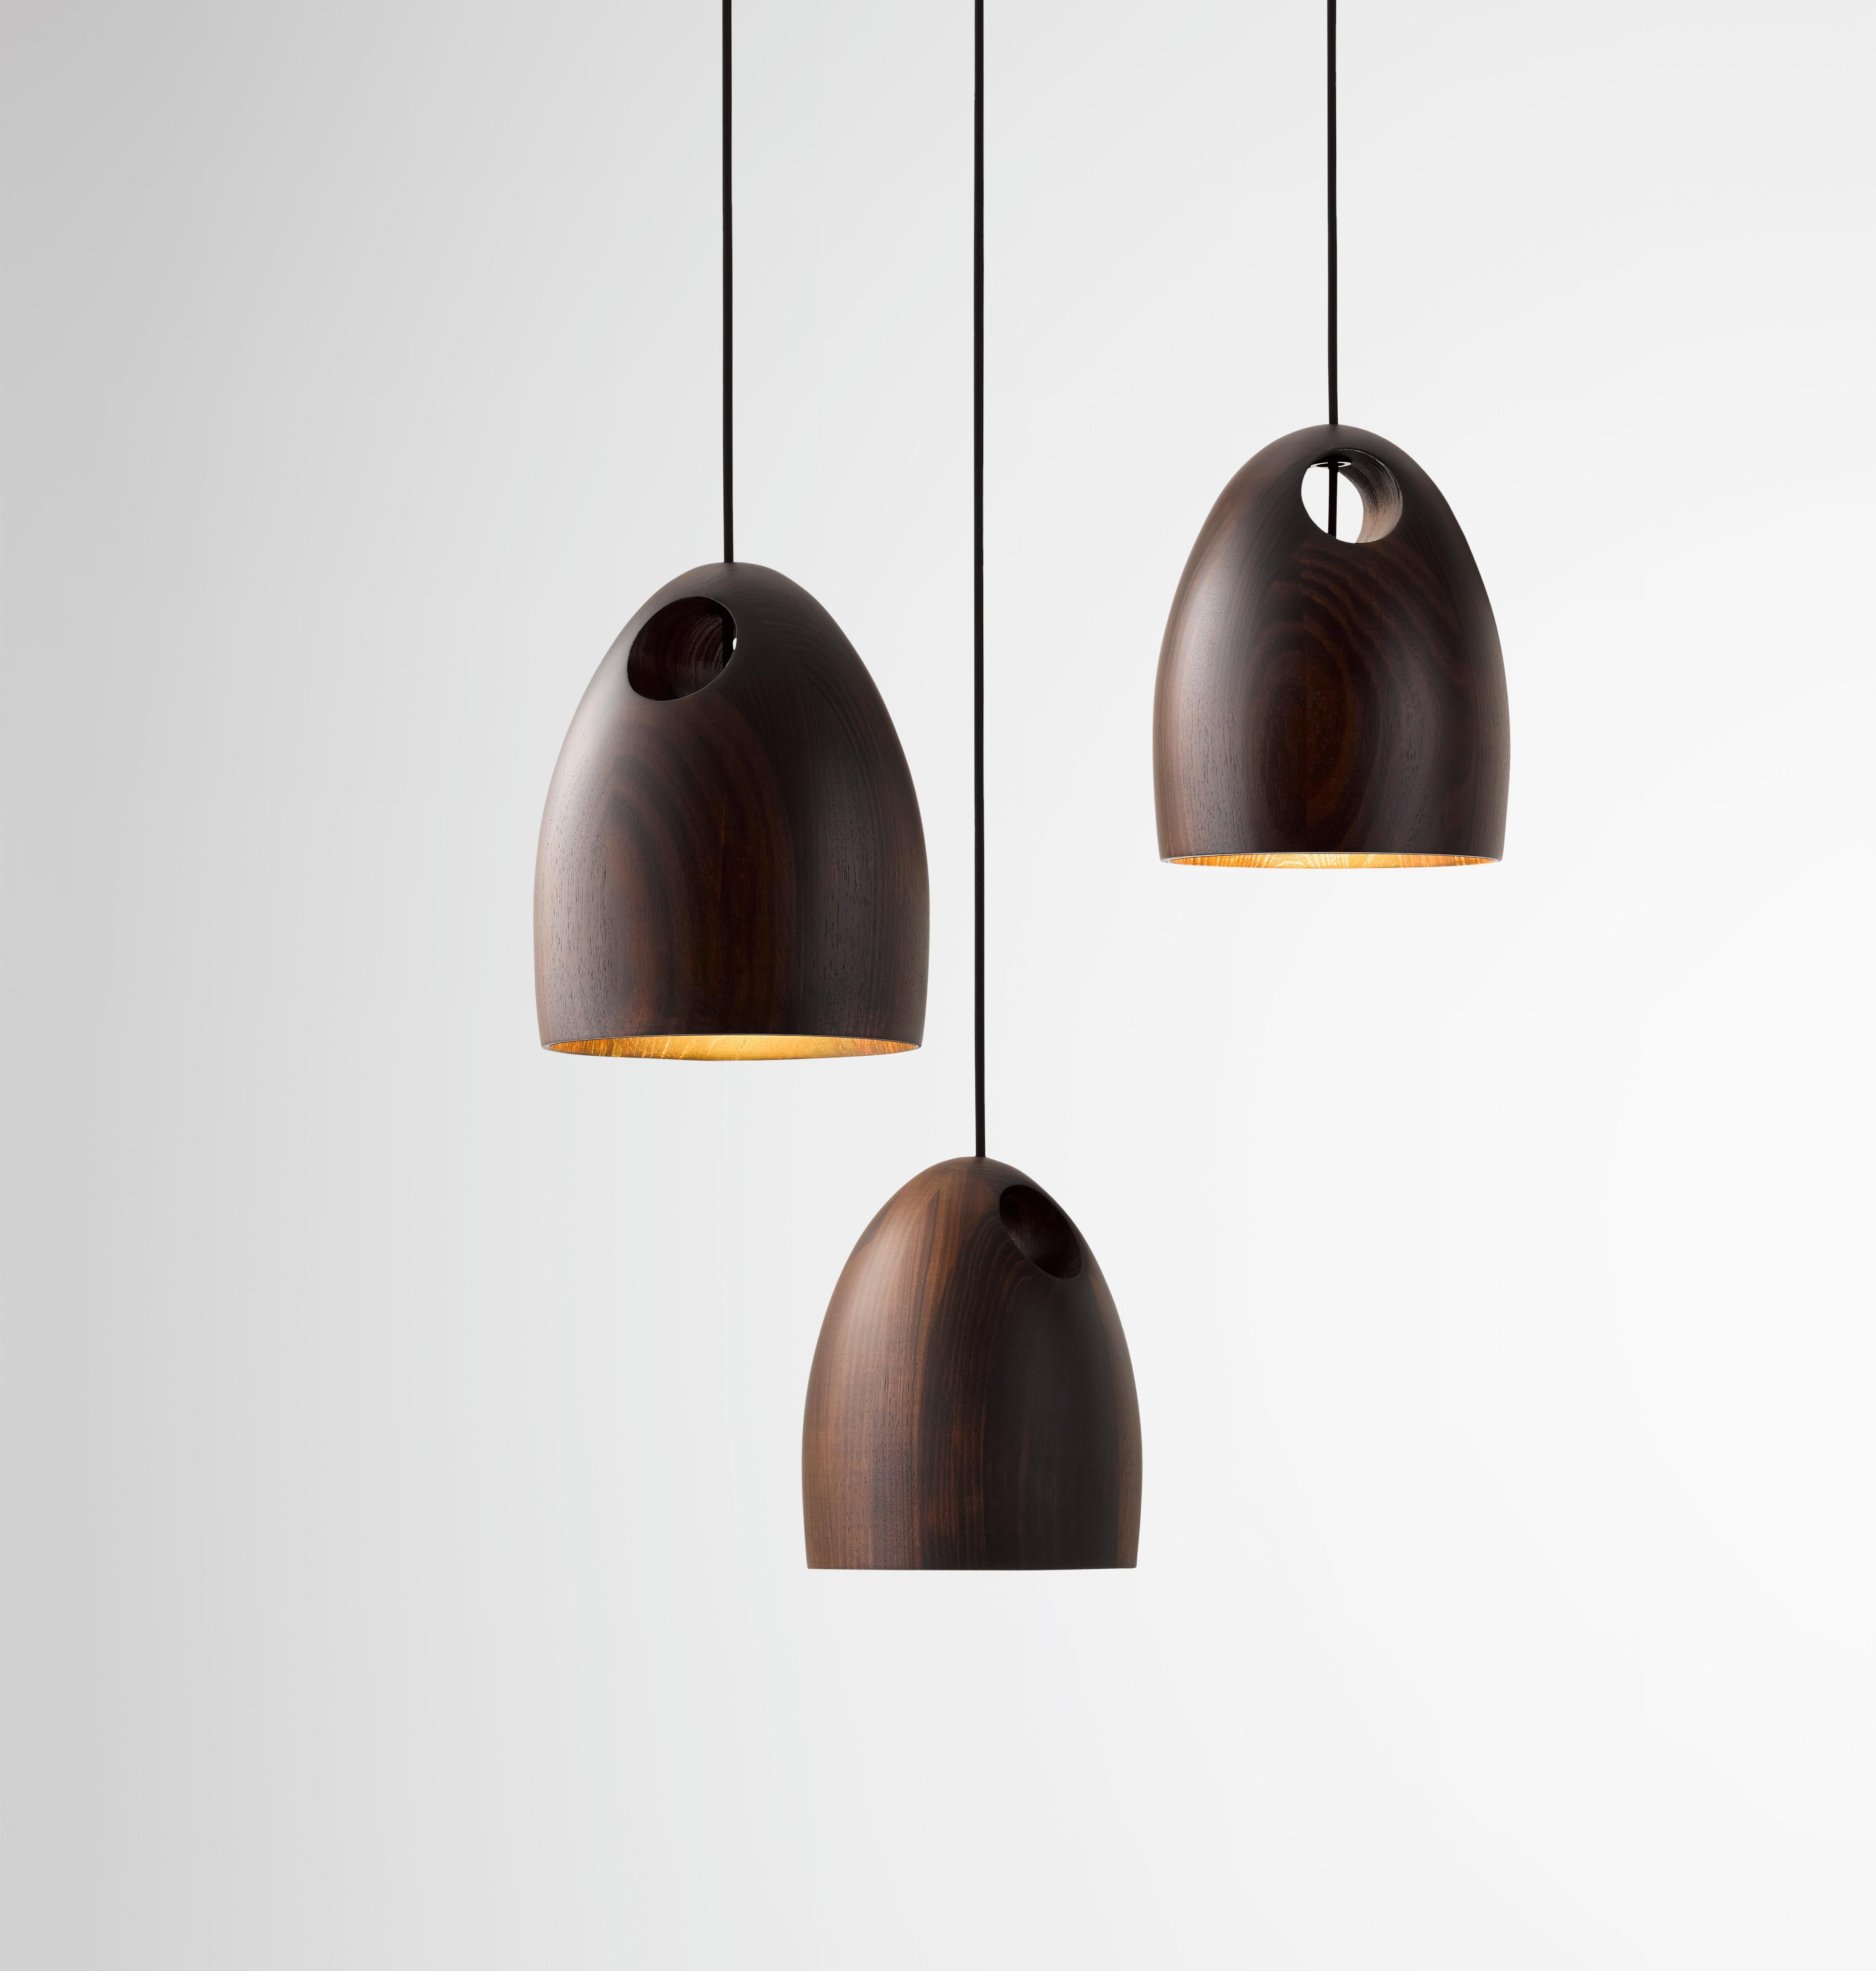 Oak is a sustainably sourced timber pendant light which emits a delicate luminance. Each Oak Pendant Light shade is hand crafted and defined by the grain of the timber selected. The body of the light is accentuated by the intersecting hole which